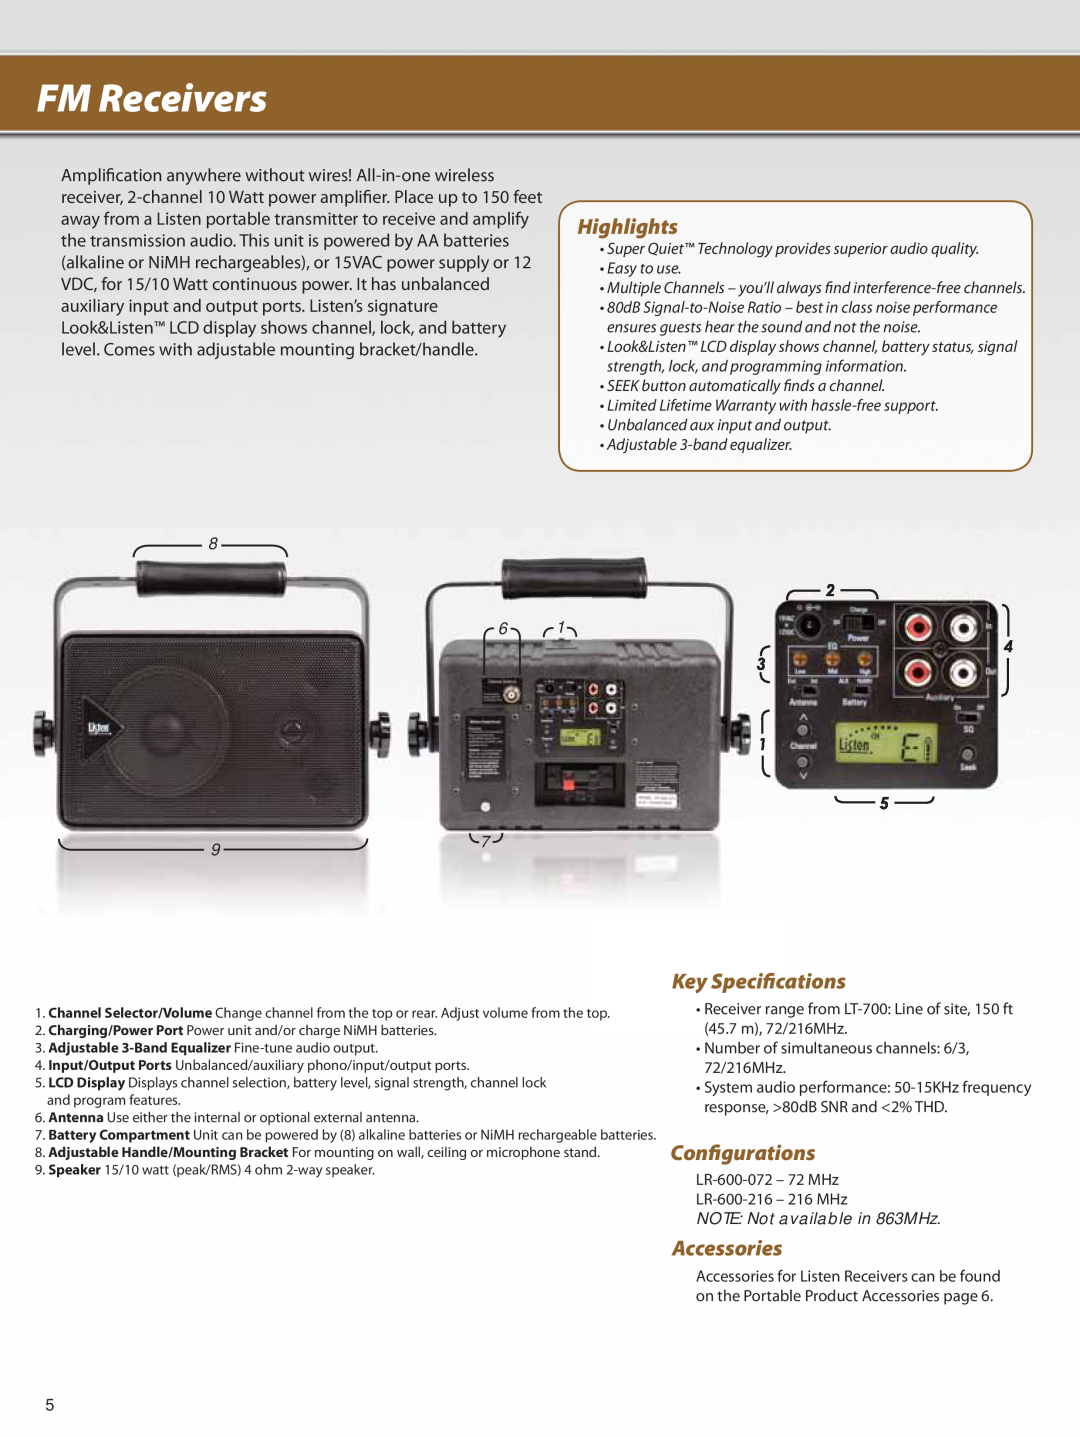 Listen Technologies Portable FM manual FM Receivers, Highlights, Key Specifications, Configurations, Accessories 